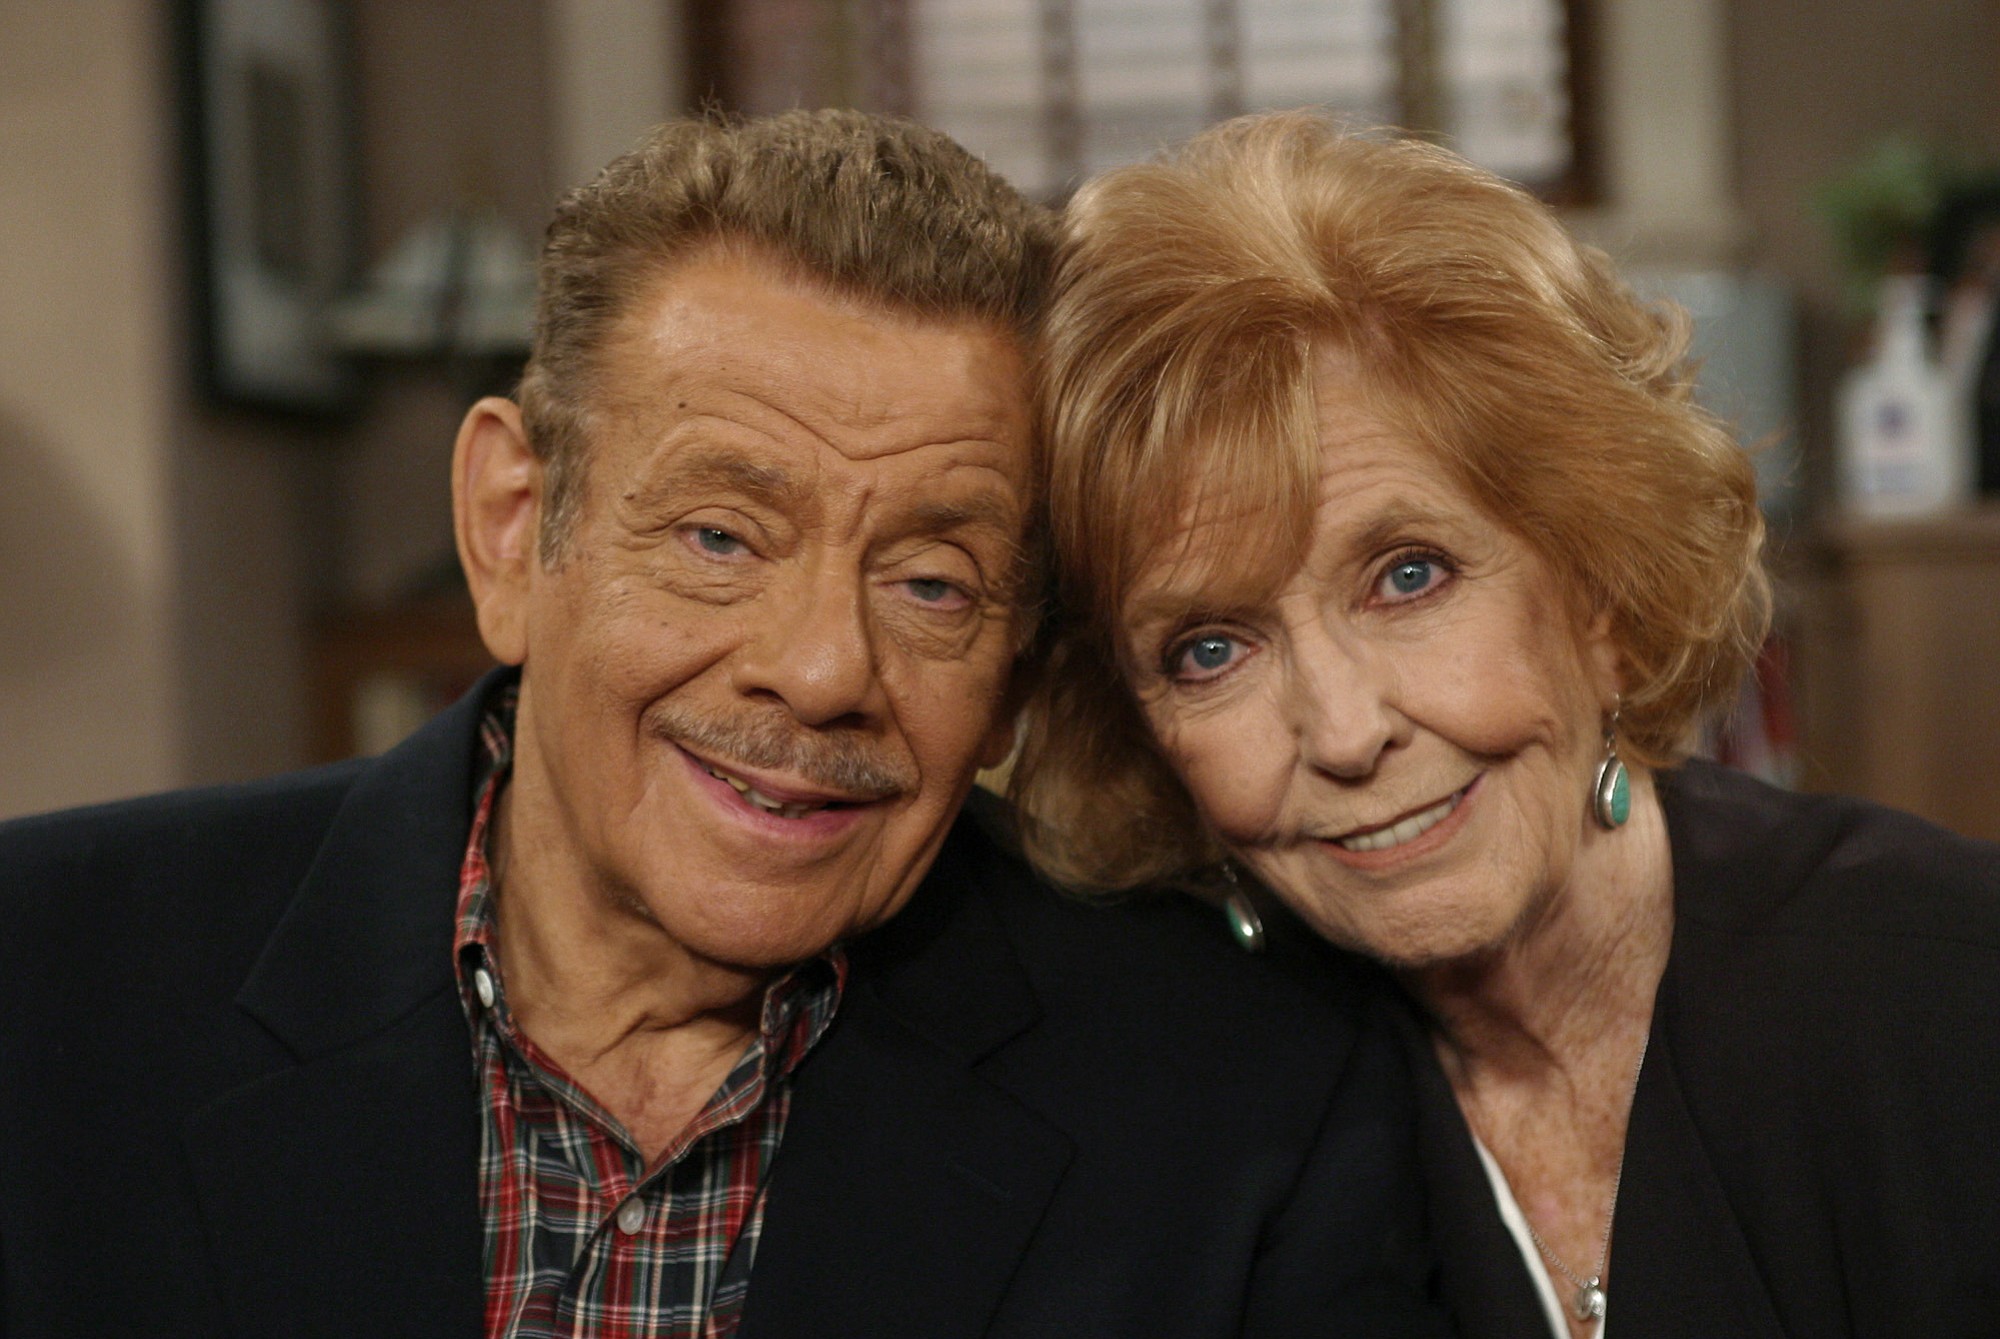 Associated Press files
Anne Meara, right, wife of Jerry Stiller, had a 60-year career in film and TV. She died May 23 at age 85.